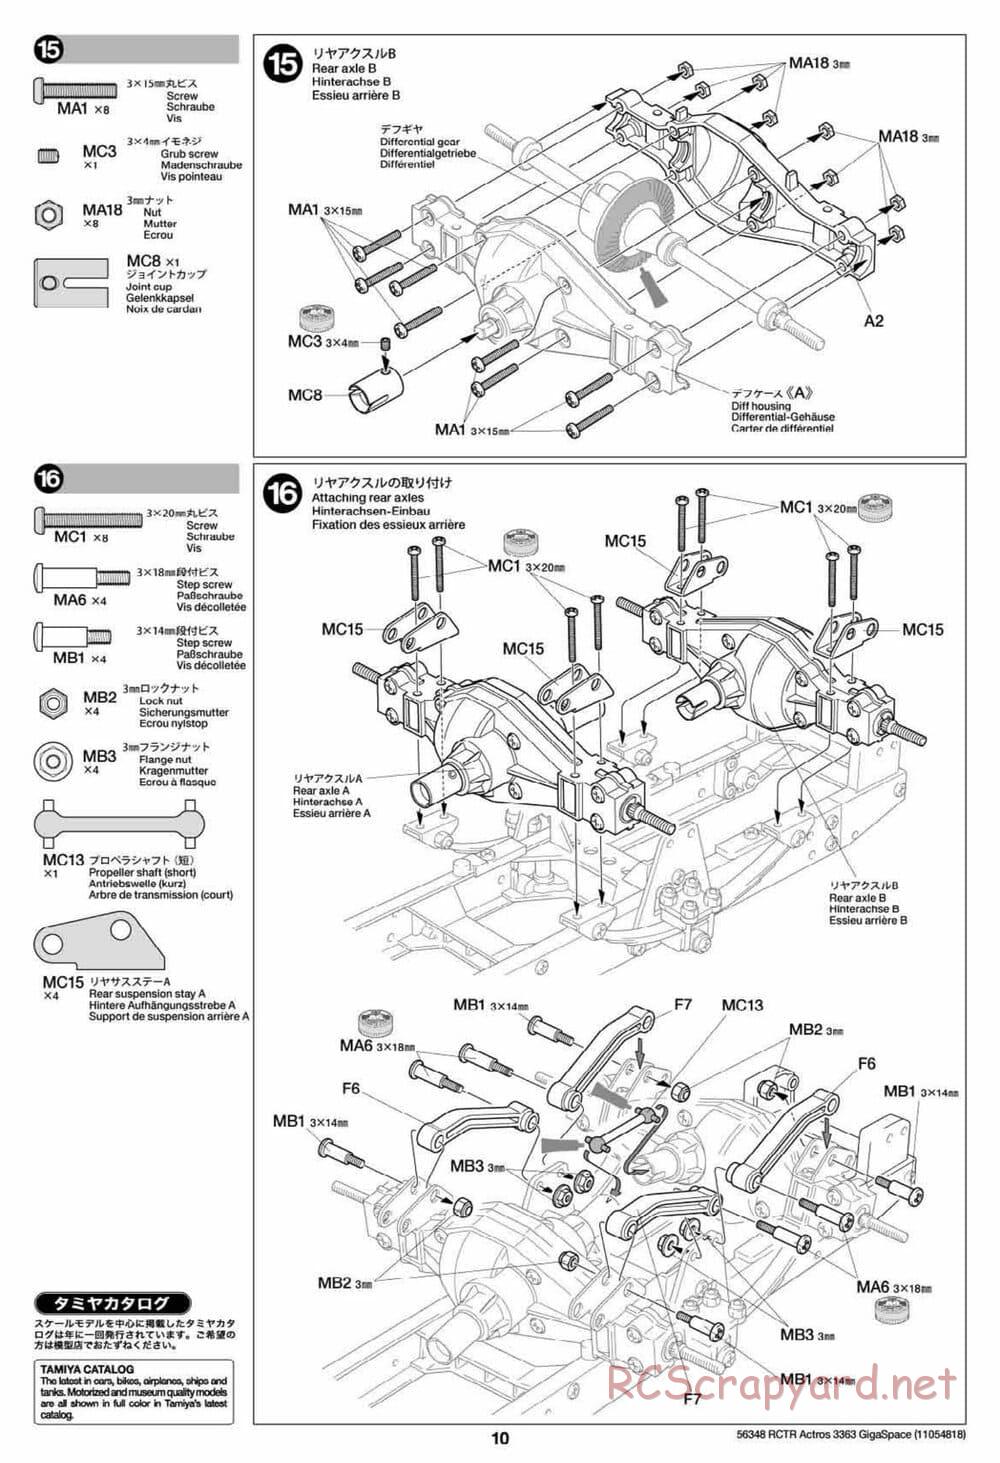 Tamiya - Mercedes-Benz Actros 3363 6x4 GigaSpace Tractor Truck Chassis - Manual - Page 10